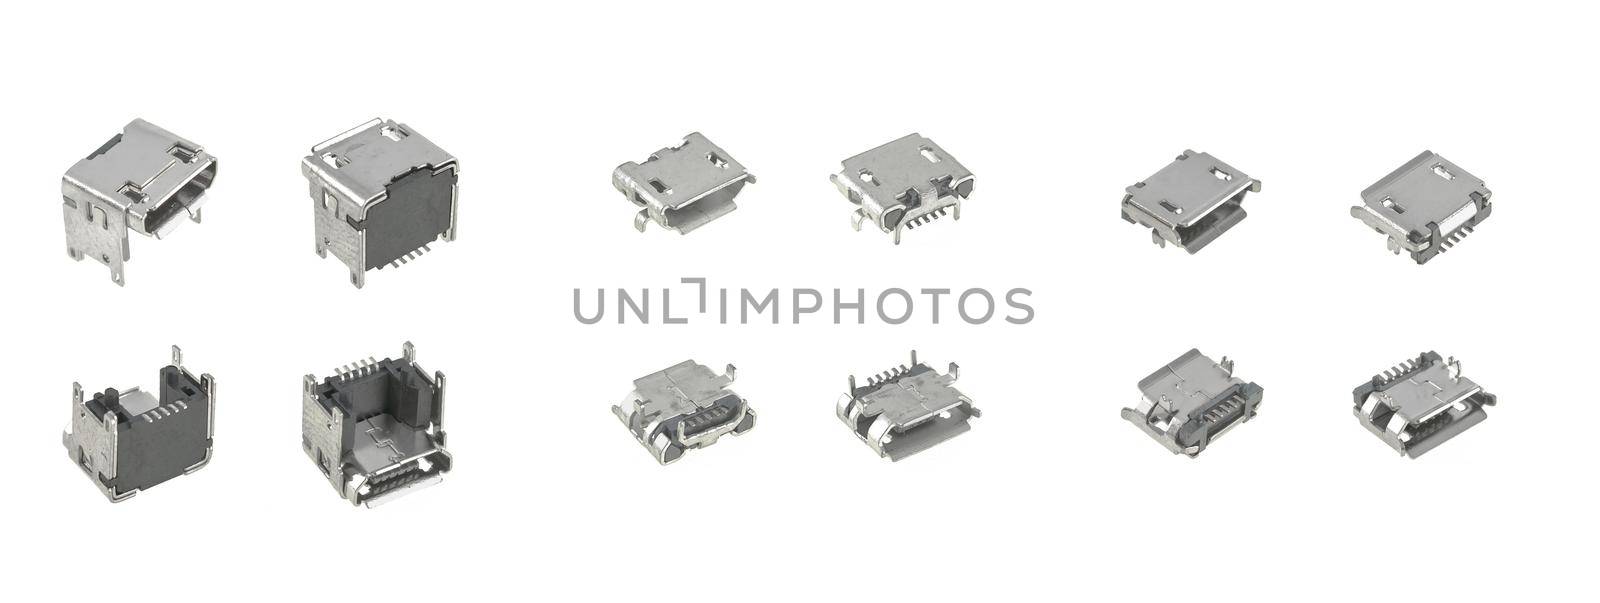 Micro-USB connectors, view from four sides, on a white background, collage